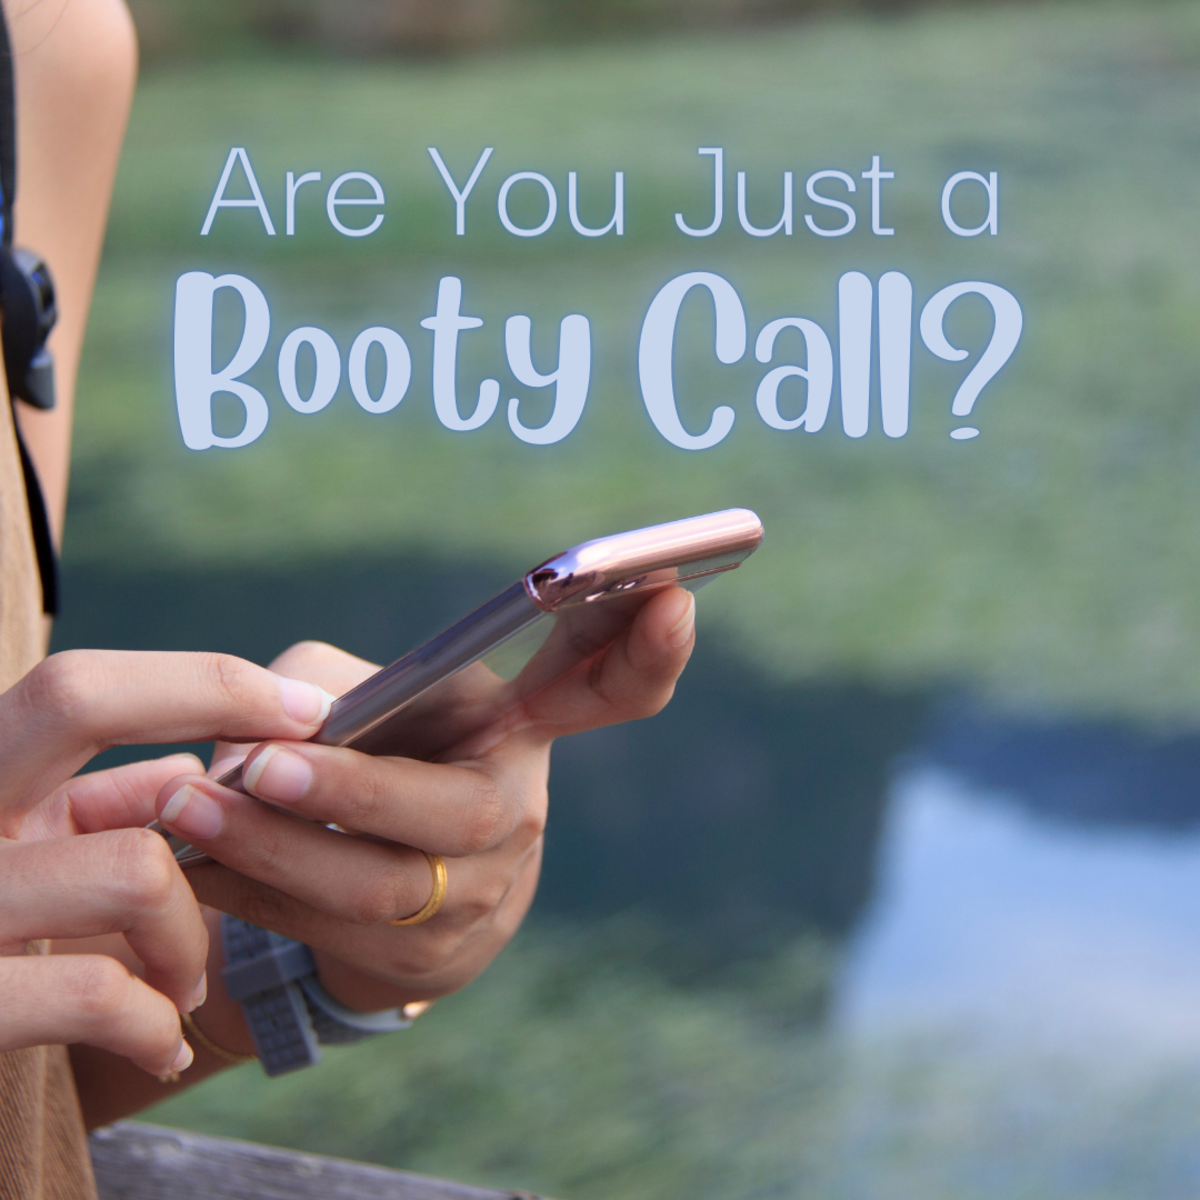 30 Signs You're a Booty Call